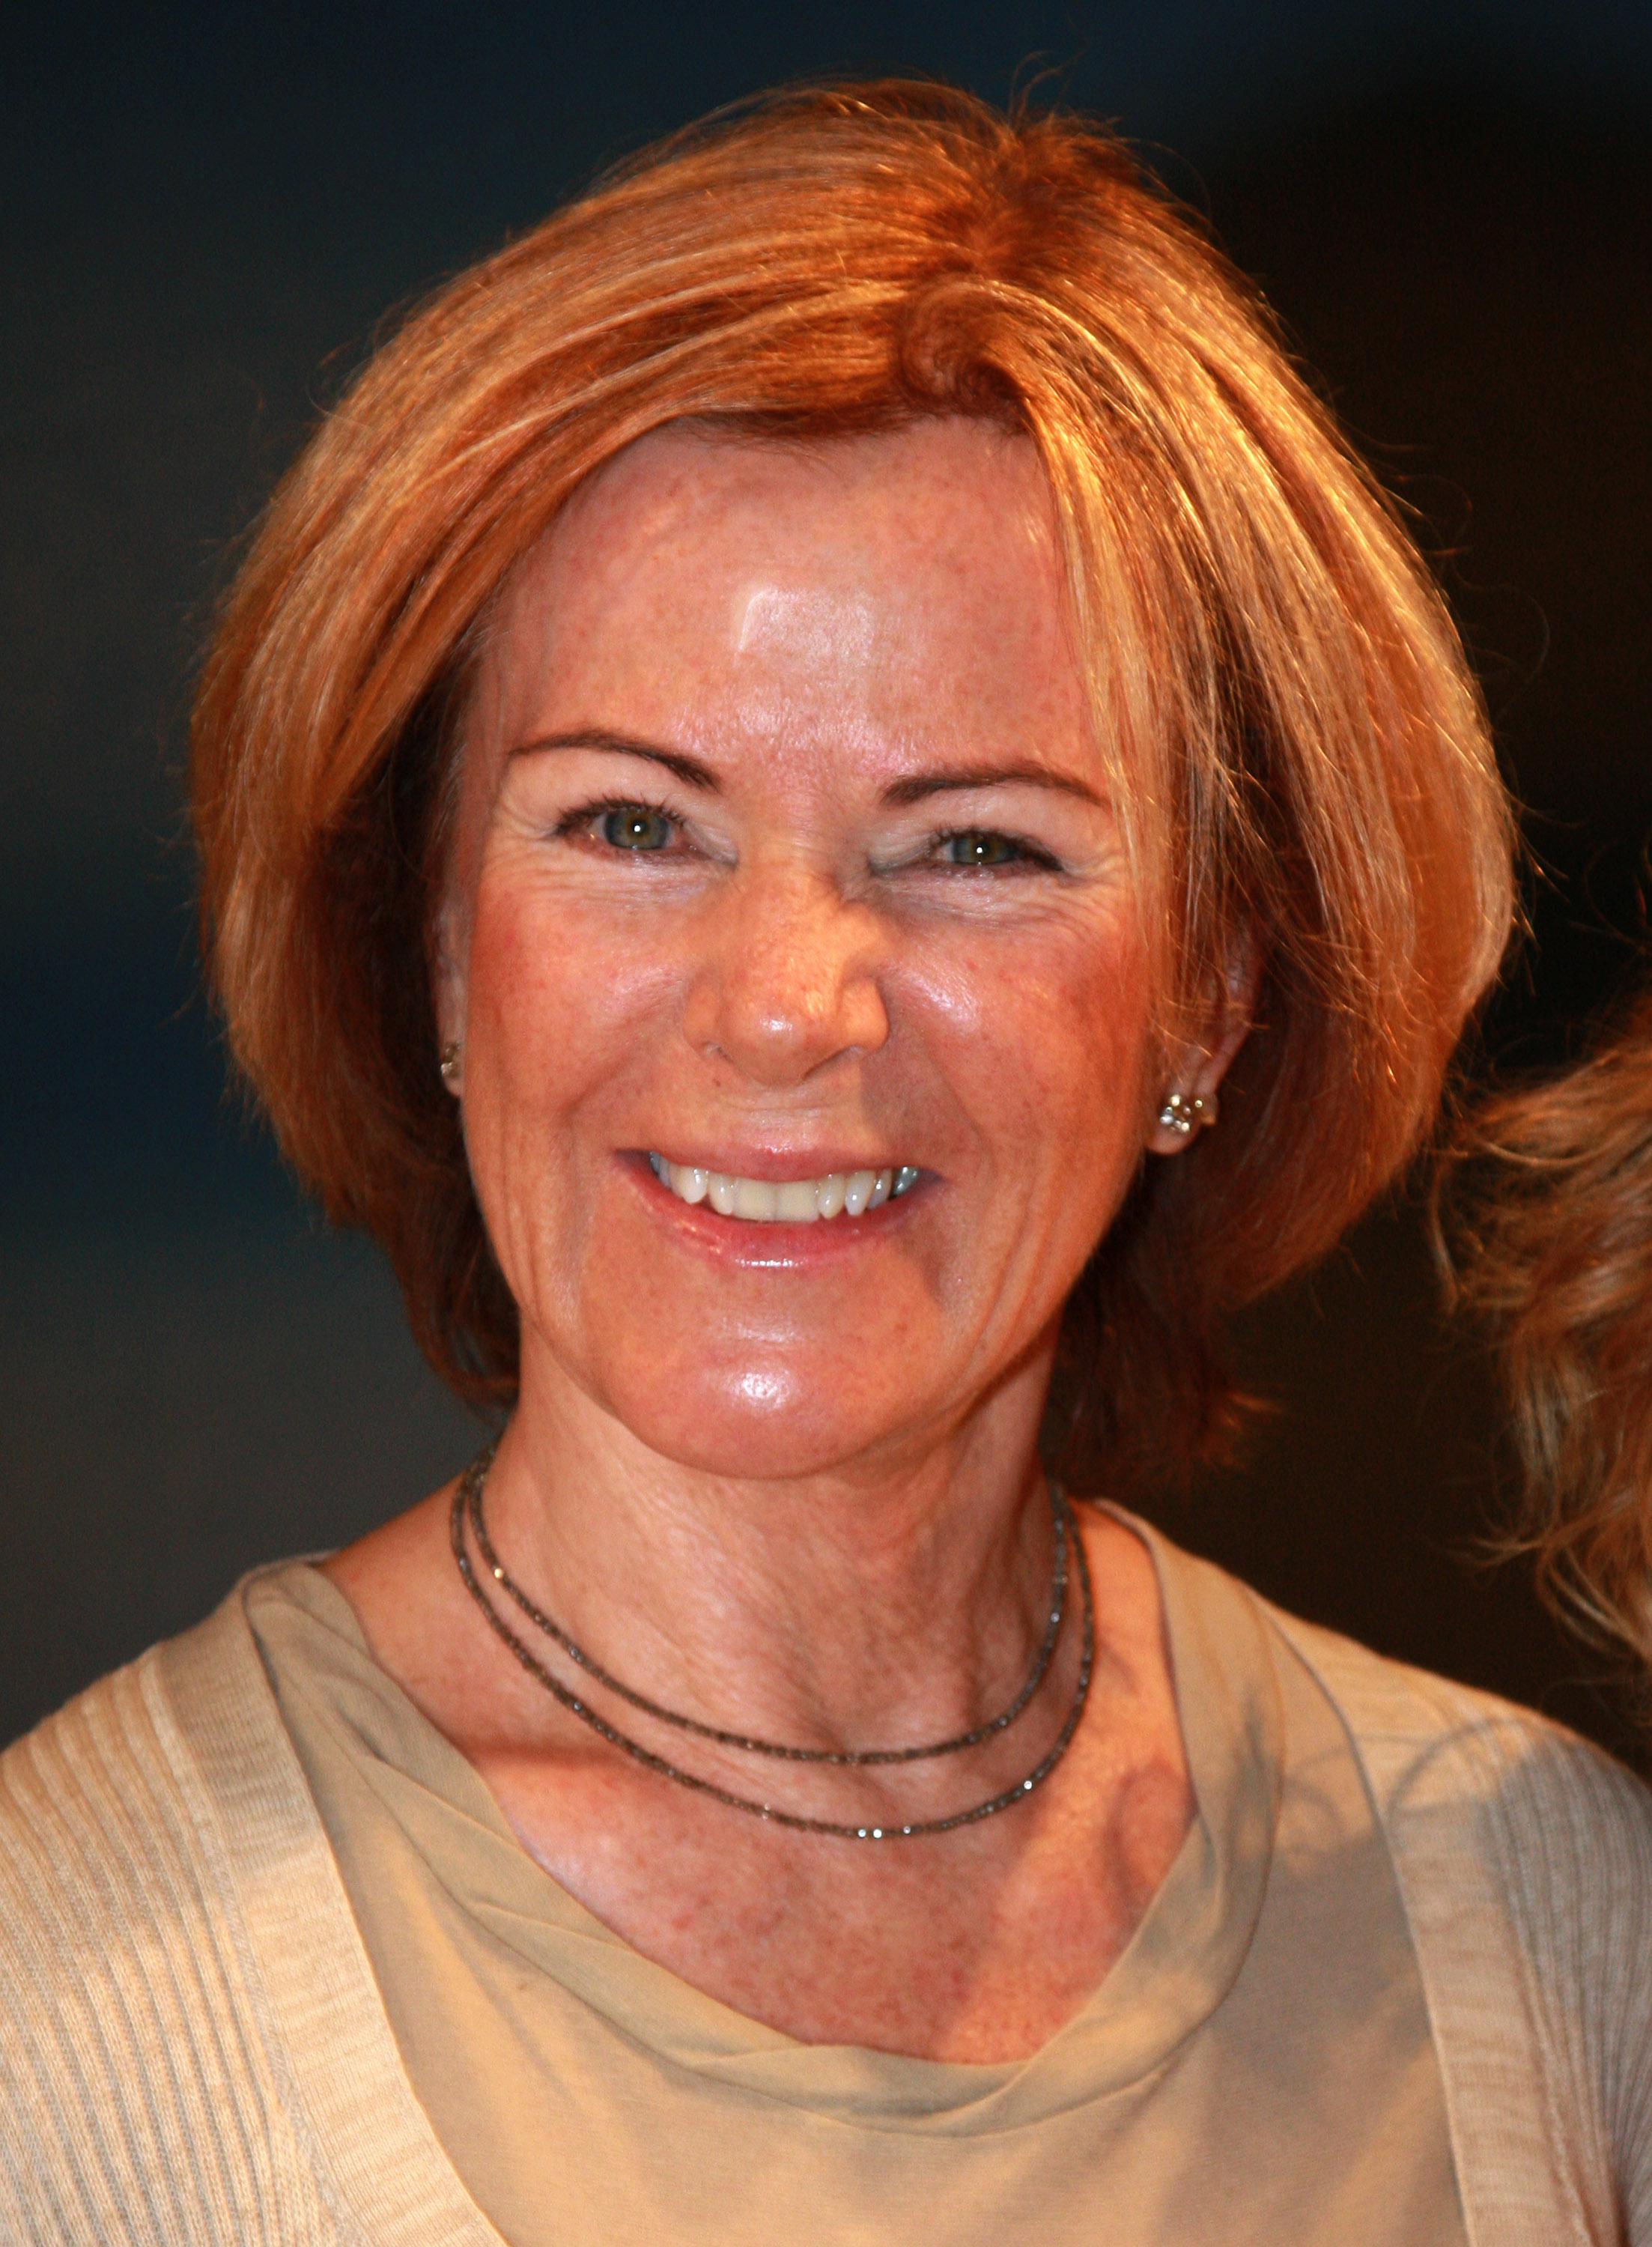 Anni-Frid Lyngstad of the pop group ABBA poses backstage at the ABBA Musical Mamma Mia! on Broadway at the Winter Garden Theater in New York City on April 24, 2008. | Source: Getty Images